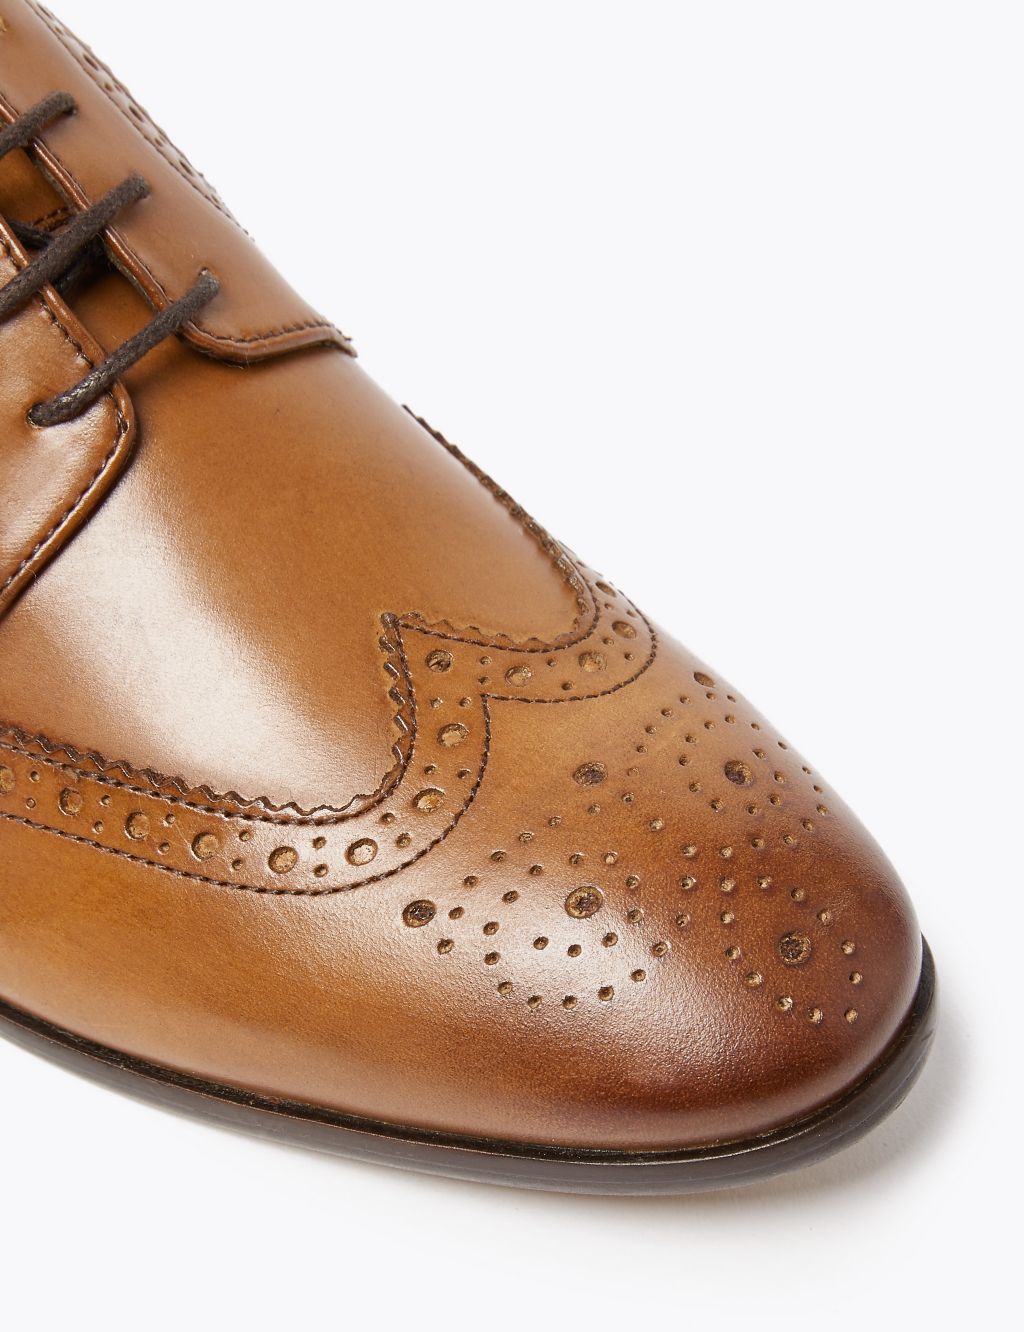 Wide Fit Leather Brogues image 4